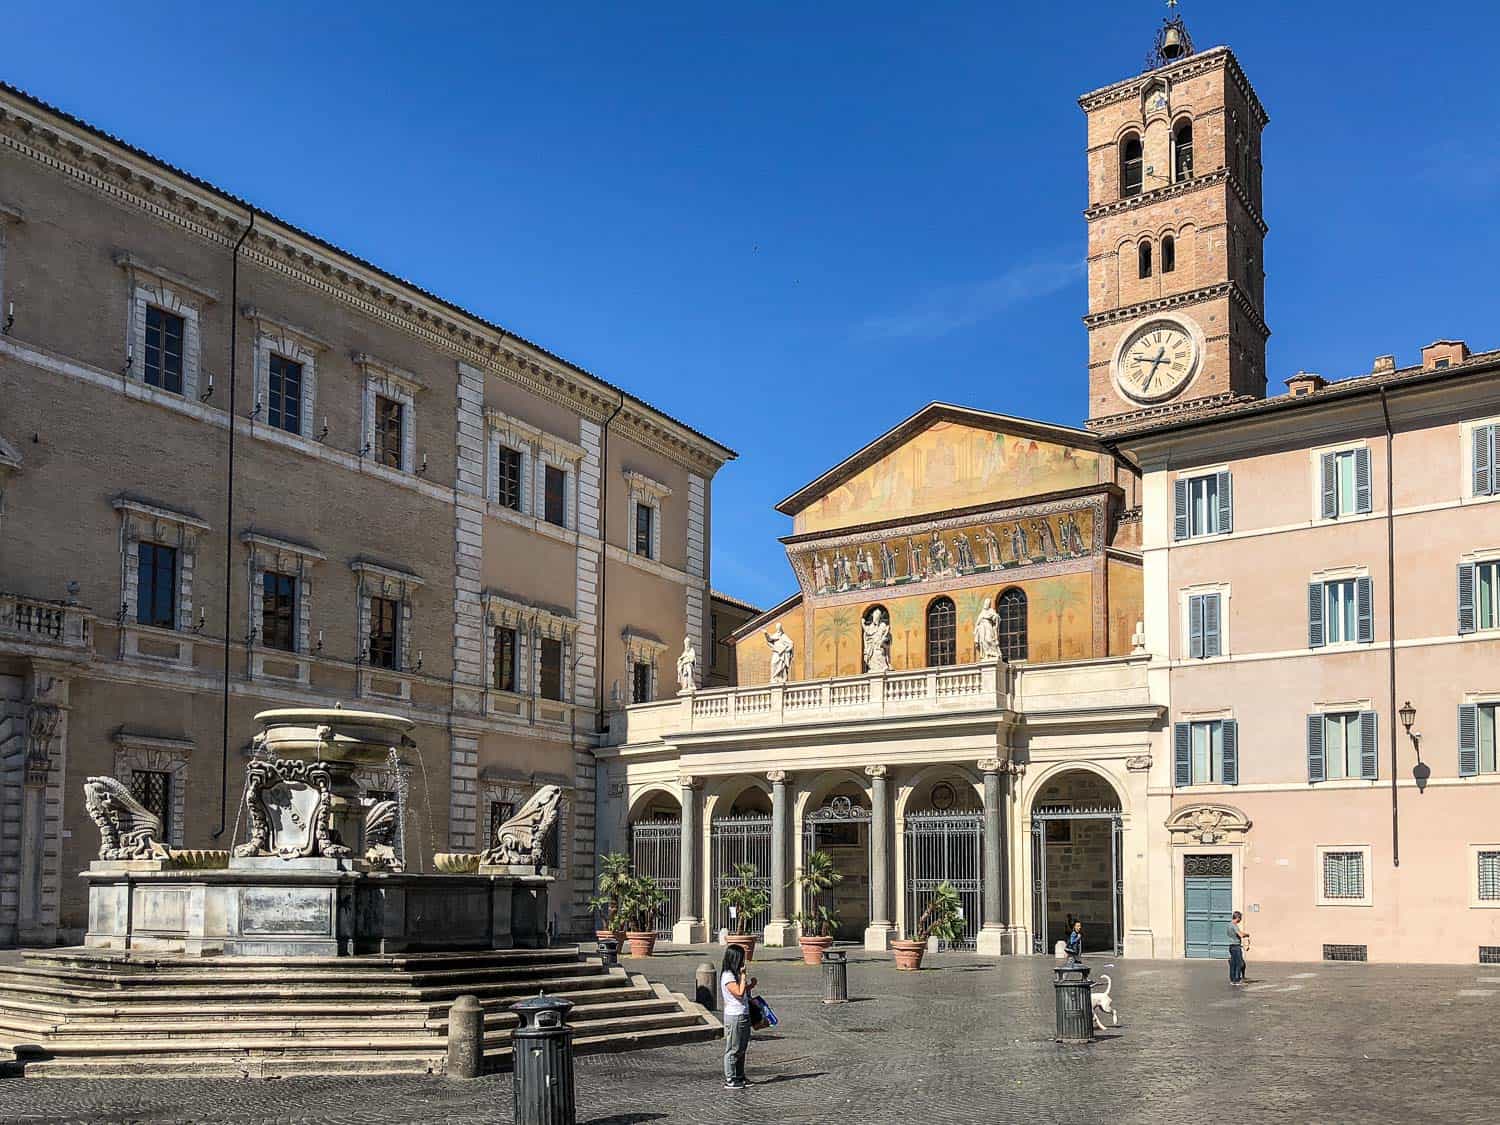 Church and fountain in a quiet Piazza Santa Maria in Trastevere, Rome, Italy